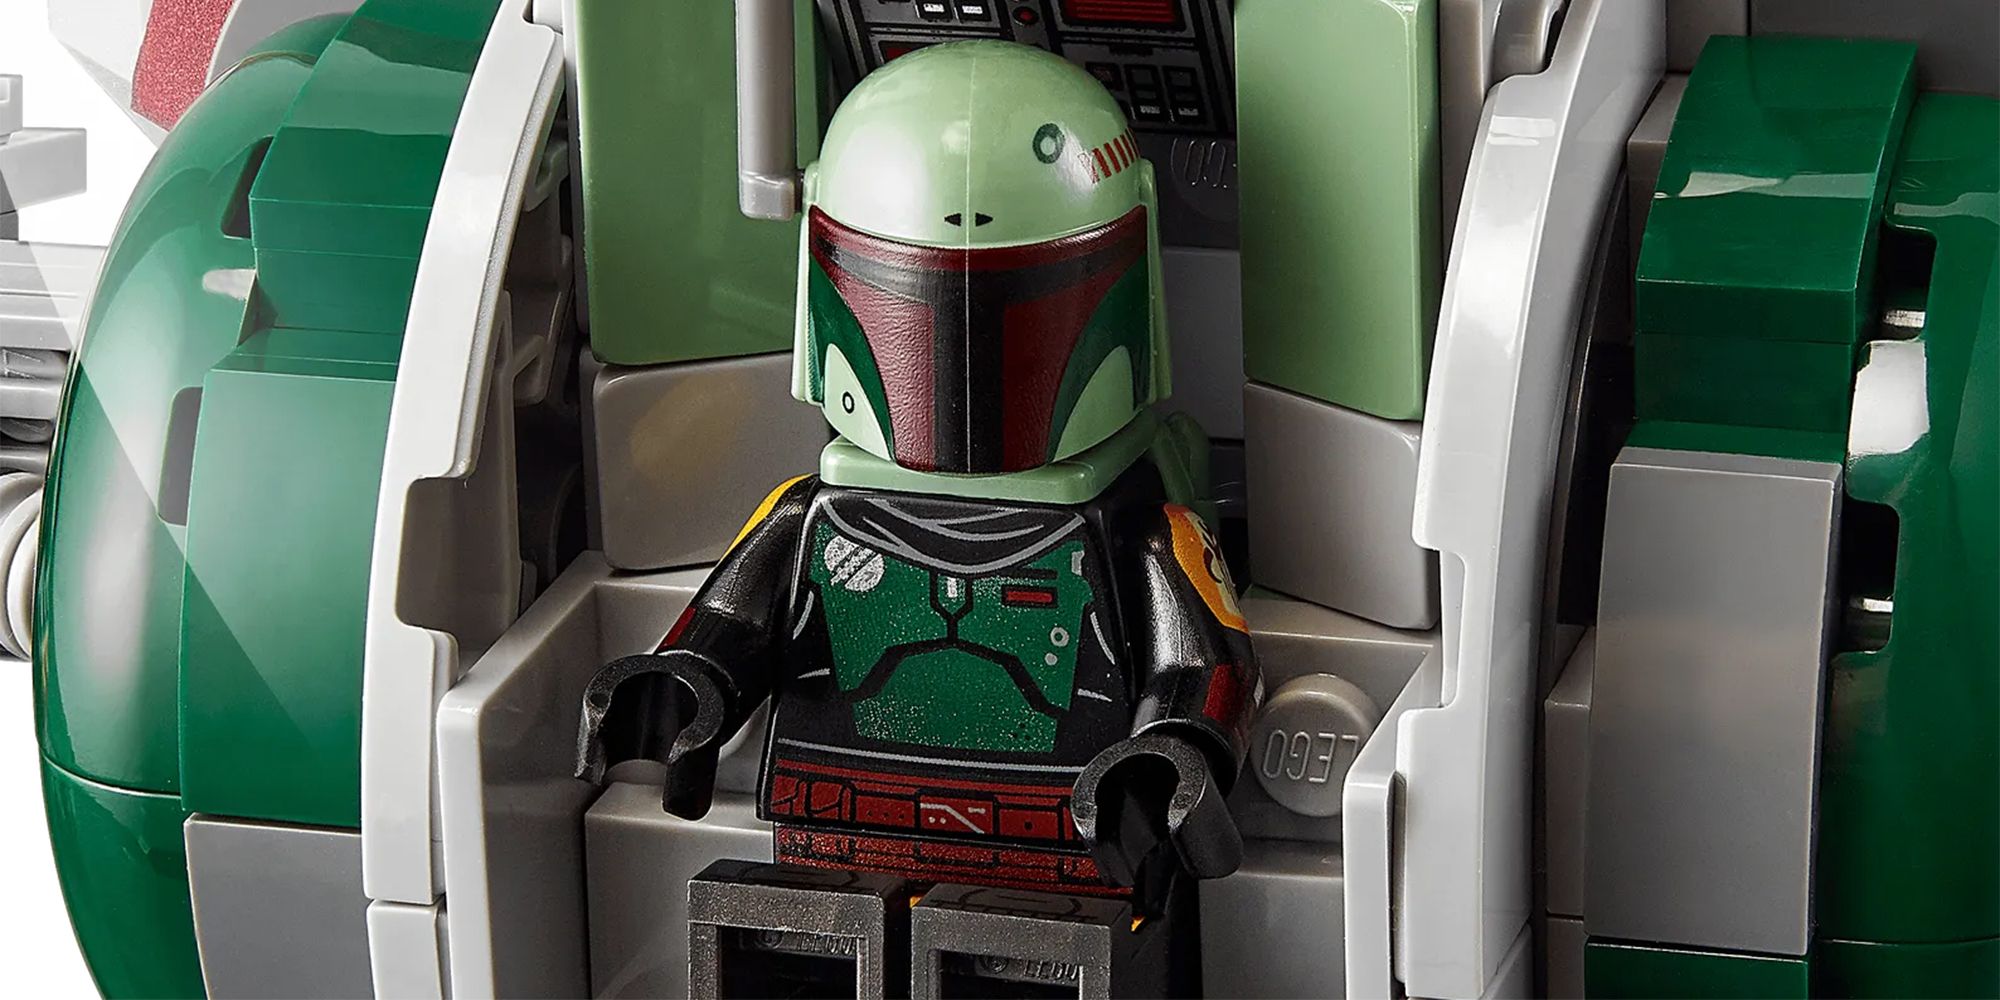 Disney is Moving Away From Using Slave 1 Name for Boba Fett’s Ship